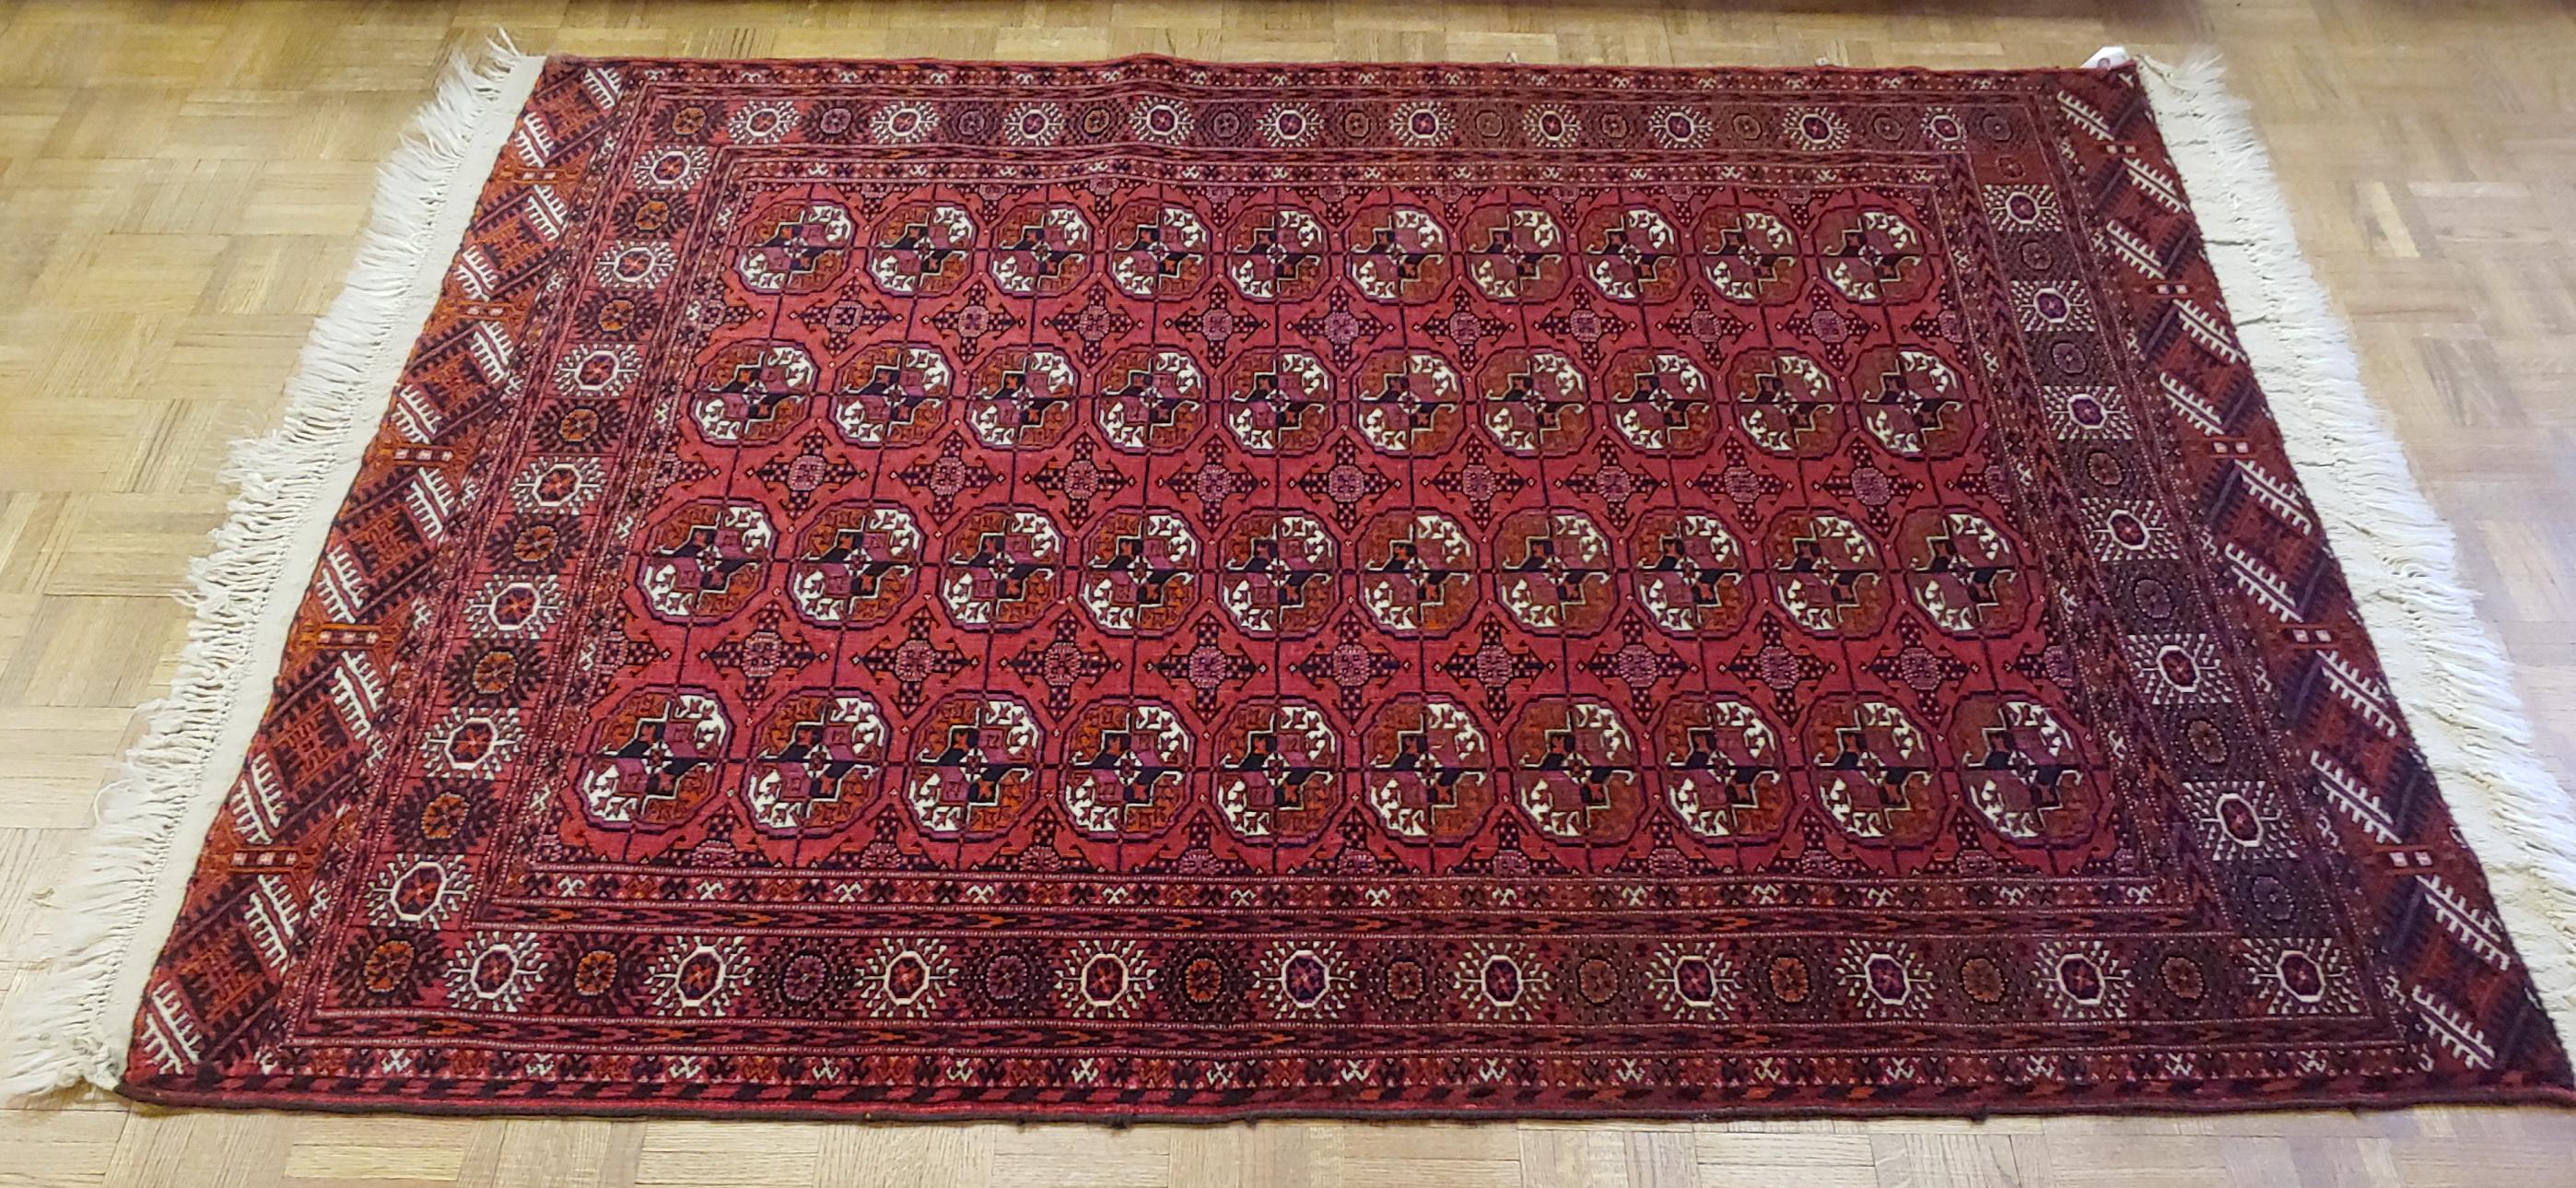 This beautiful Bohkara rug, also spelled Bukhara, is from the Turkmenistan region. They are well known for their traditional red background all-over designs. The Bohkara design is sometimes referred to as the elephant foot pattern. This rug is very